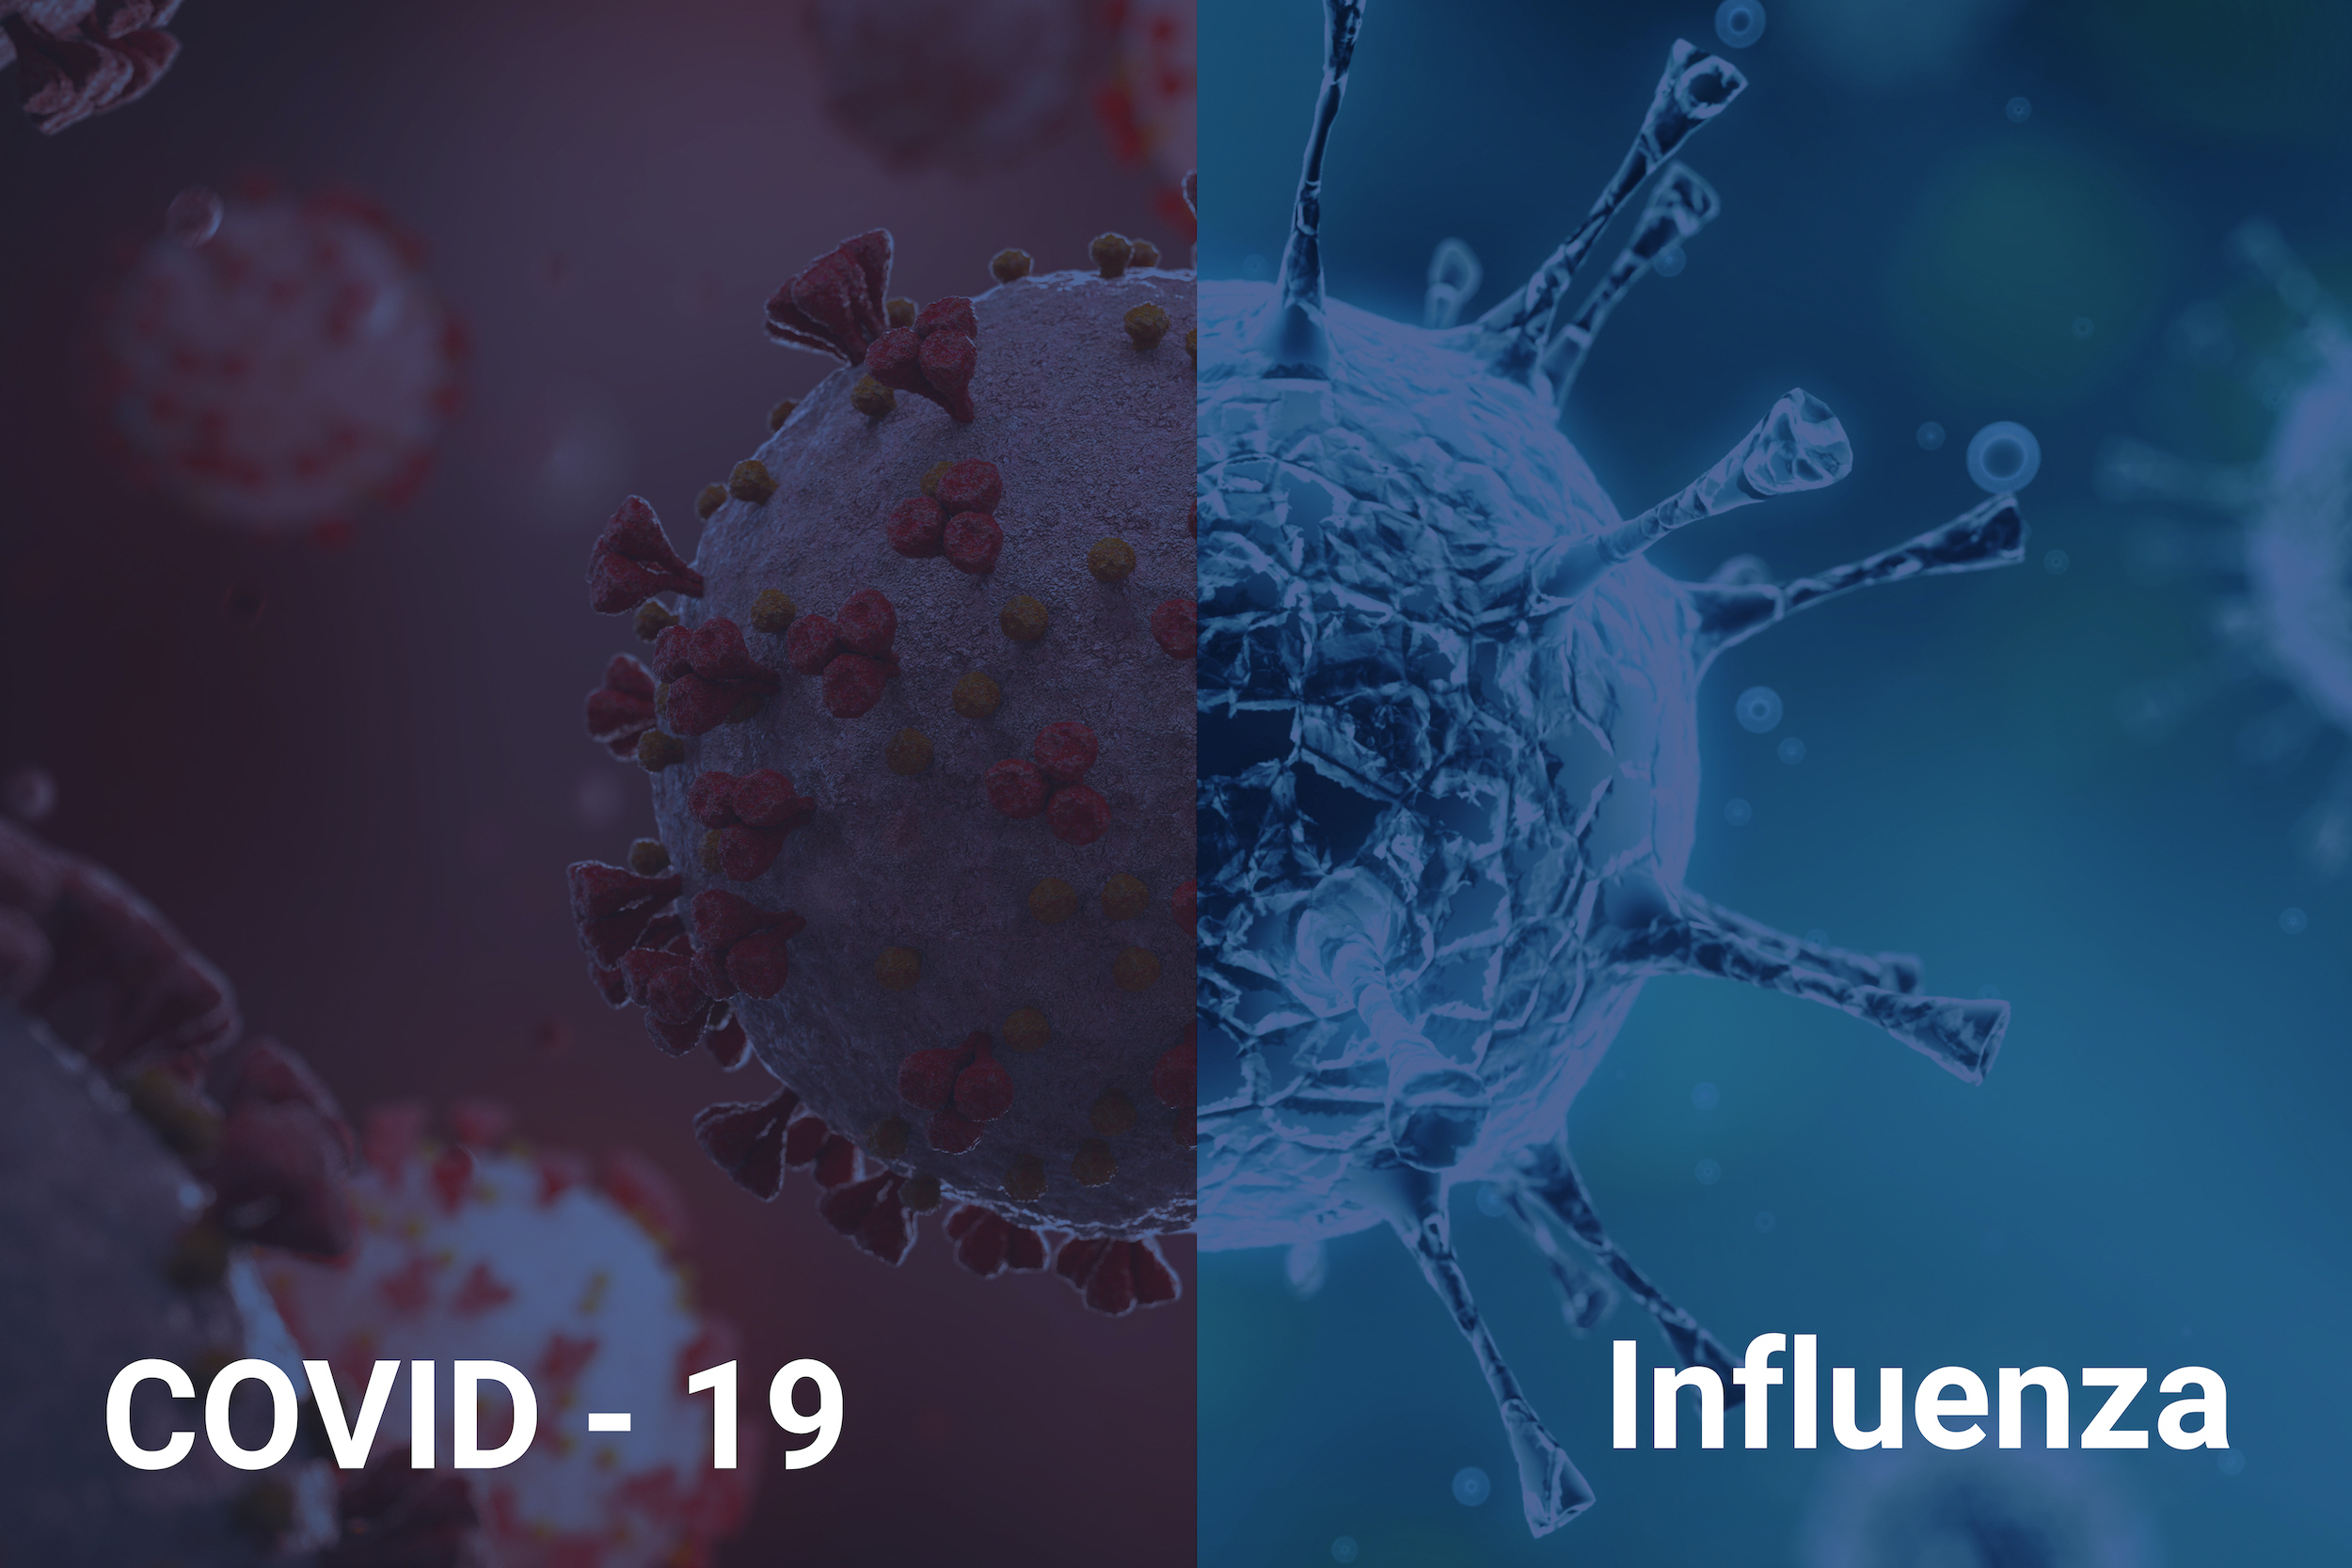 What Happens When The Flu Meets Covid-19?